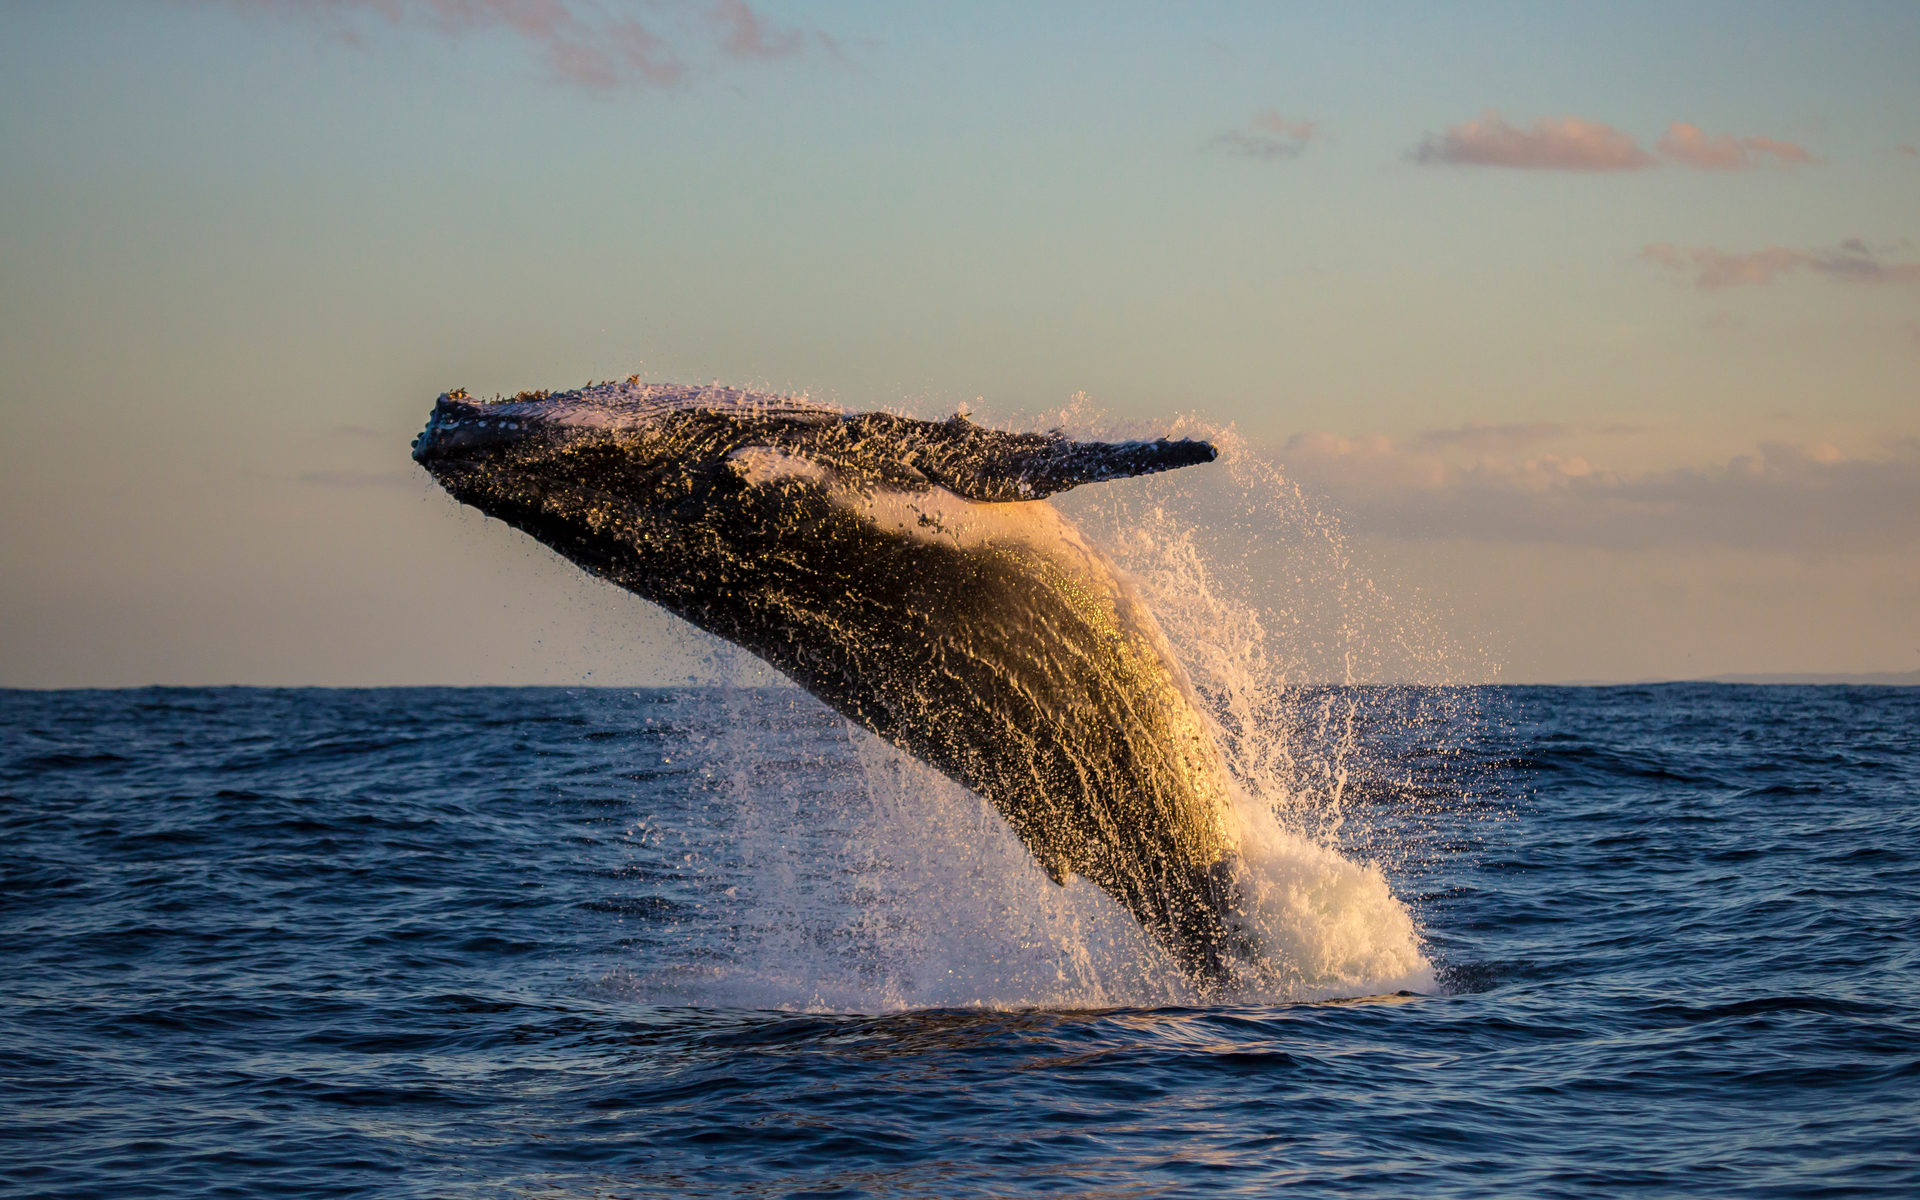 Chainlink Sees “Off the Chart” Exchange Inflows as Whales Look for an Exit